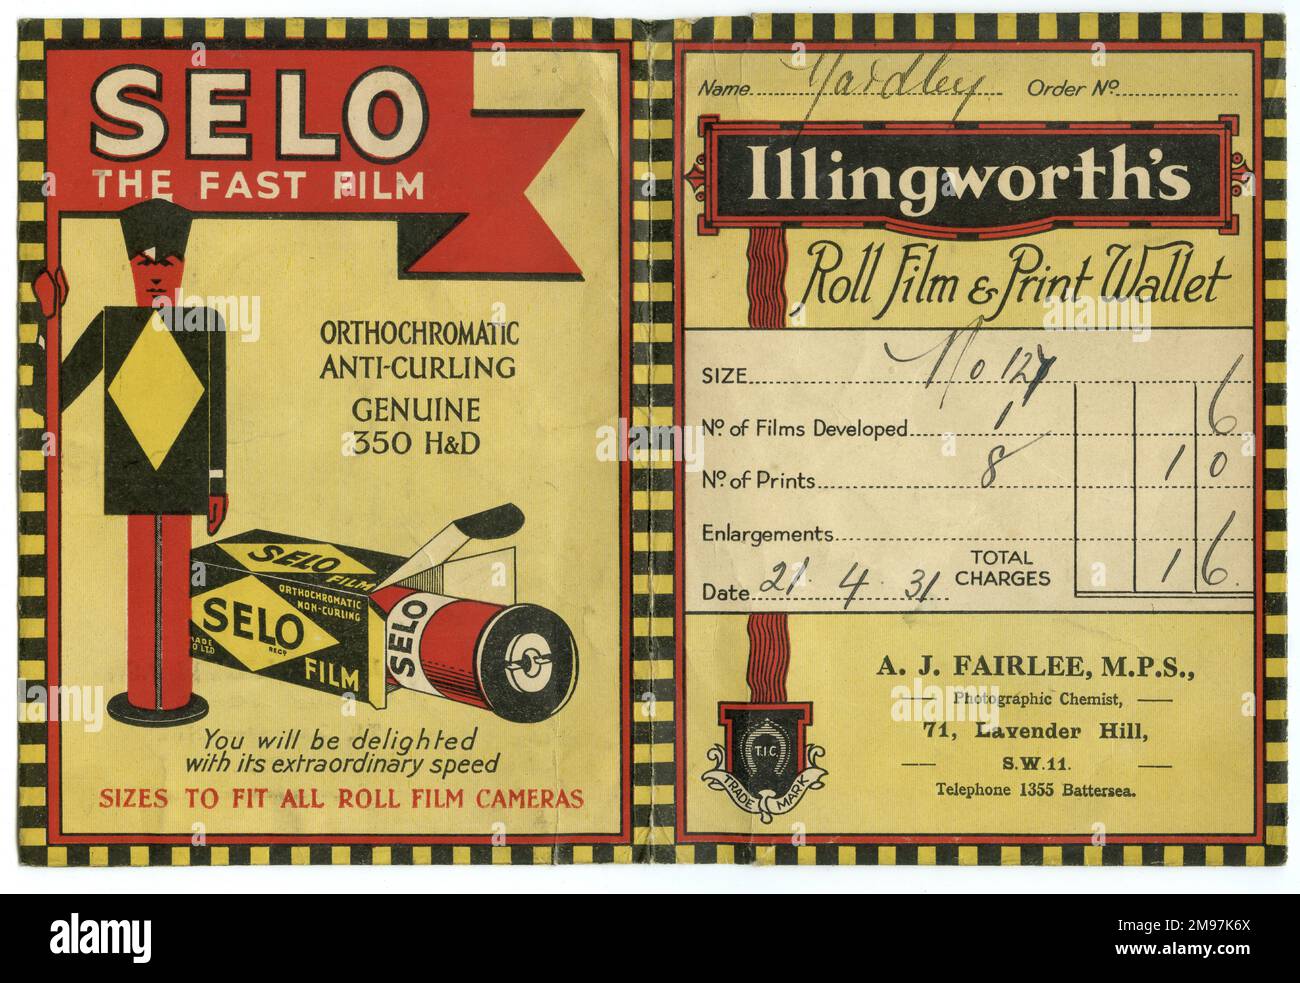 Photographic film wallet advertising Selo Film, with the developer's name and address: A J Fairlee, Lavender Hill, Battersea, London SW11.  The customer's name is Yardley, and the cost of developing is one shilling and sixpence, dated 21 April 1931. Stock Photo